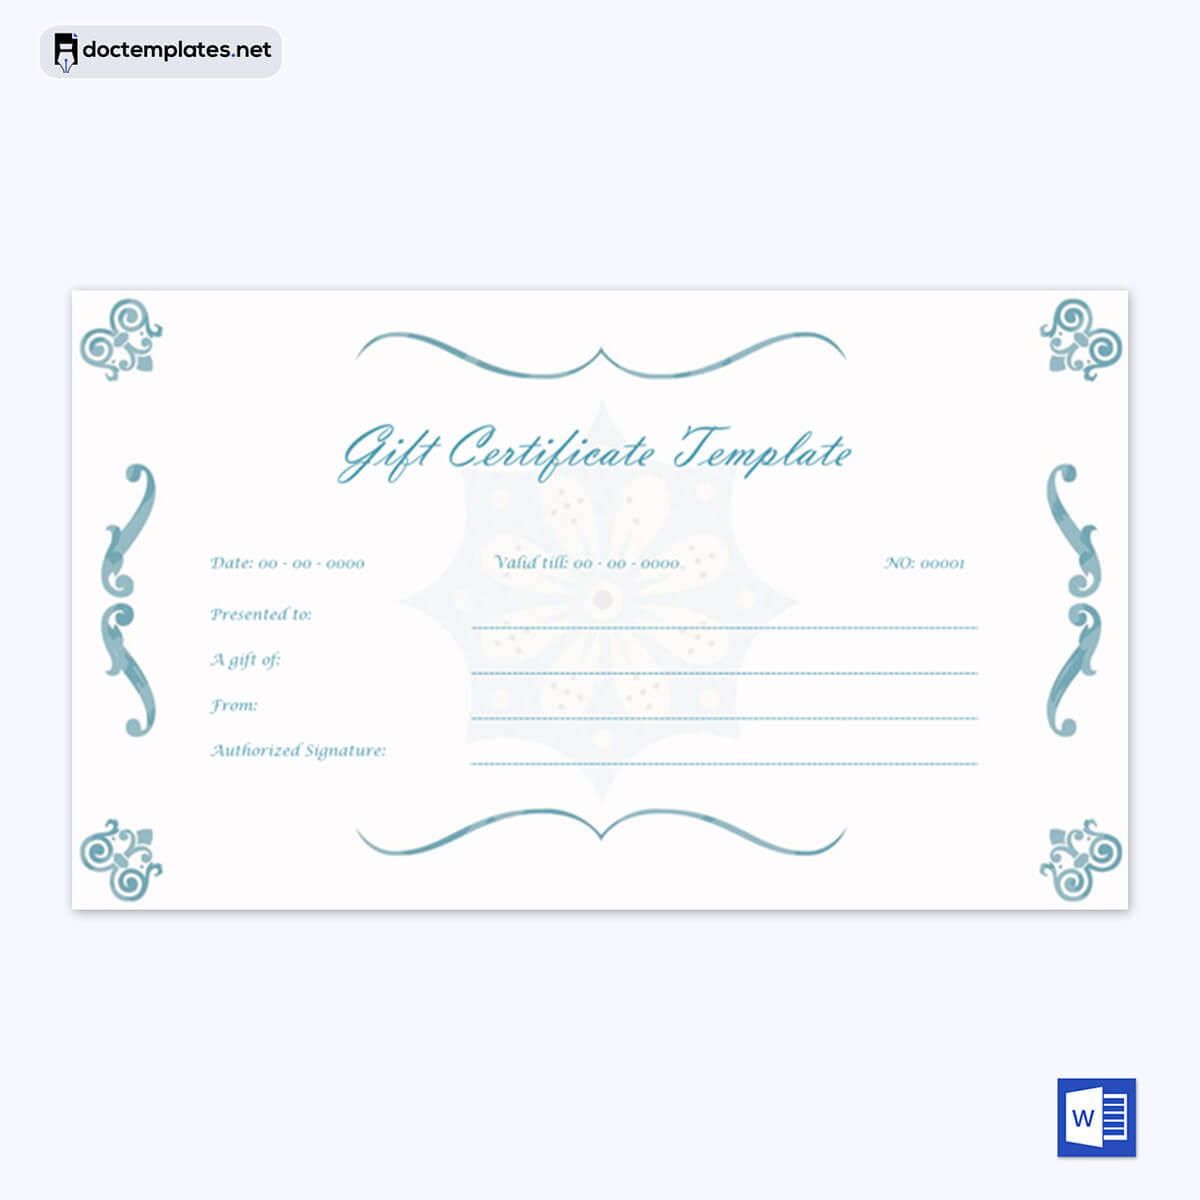 Gift Certificate Template 